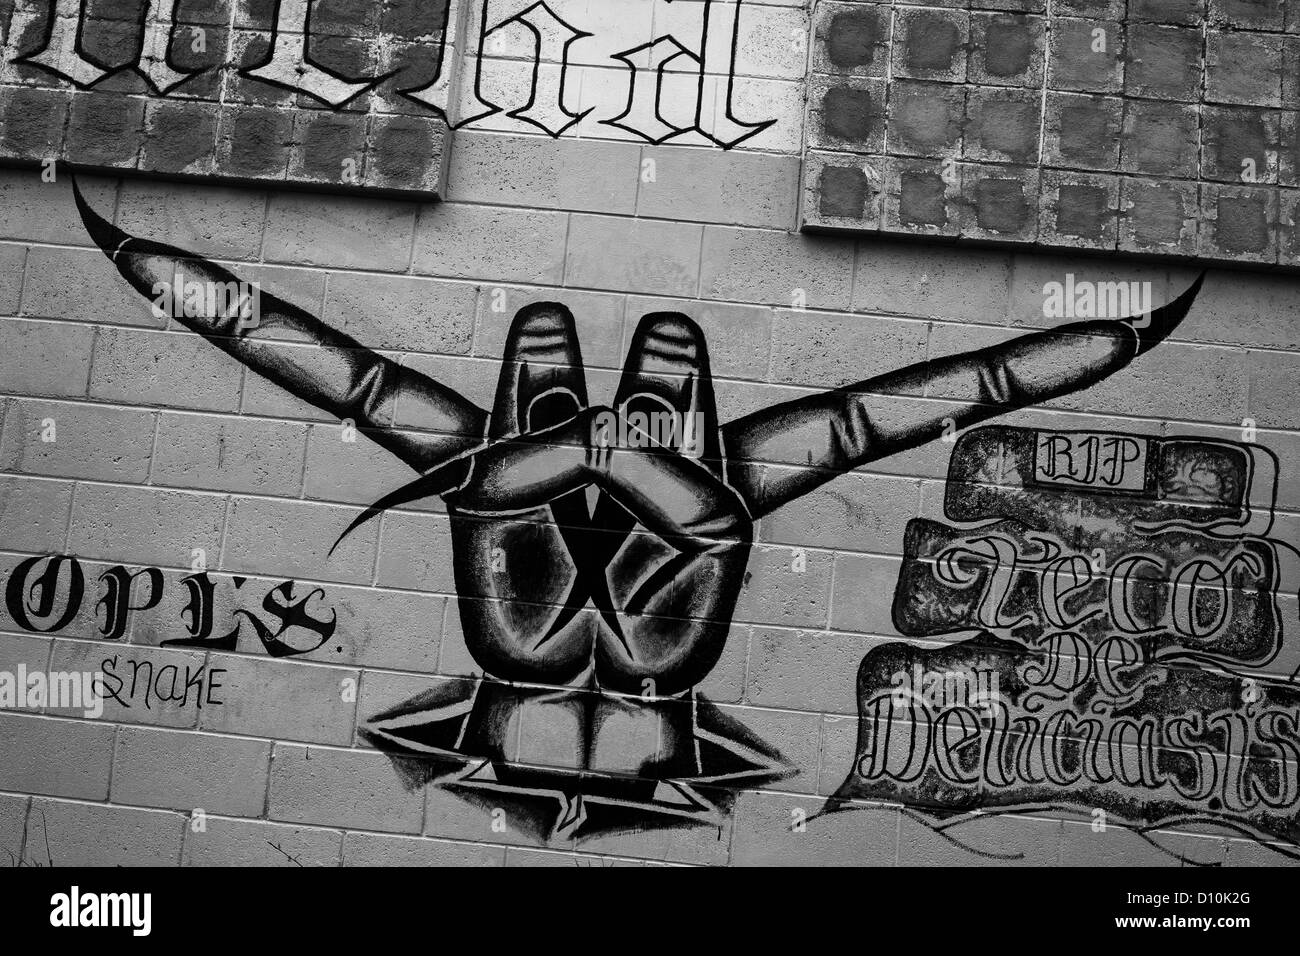 A Mara Salvatrucha gang graffiti (“Devil's horns”) painted on the wall of the prison in Tonacatepeque, El Salvador. Stock Photo